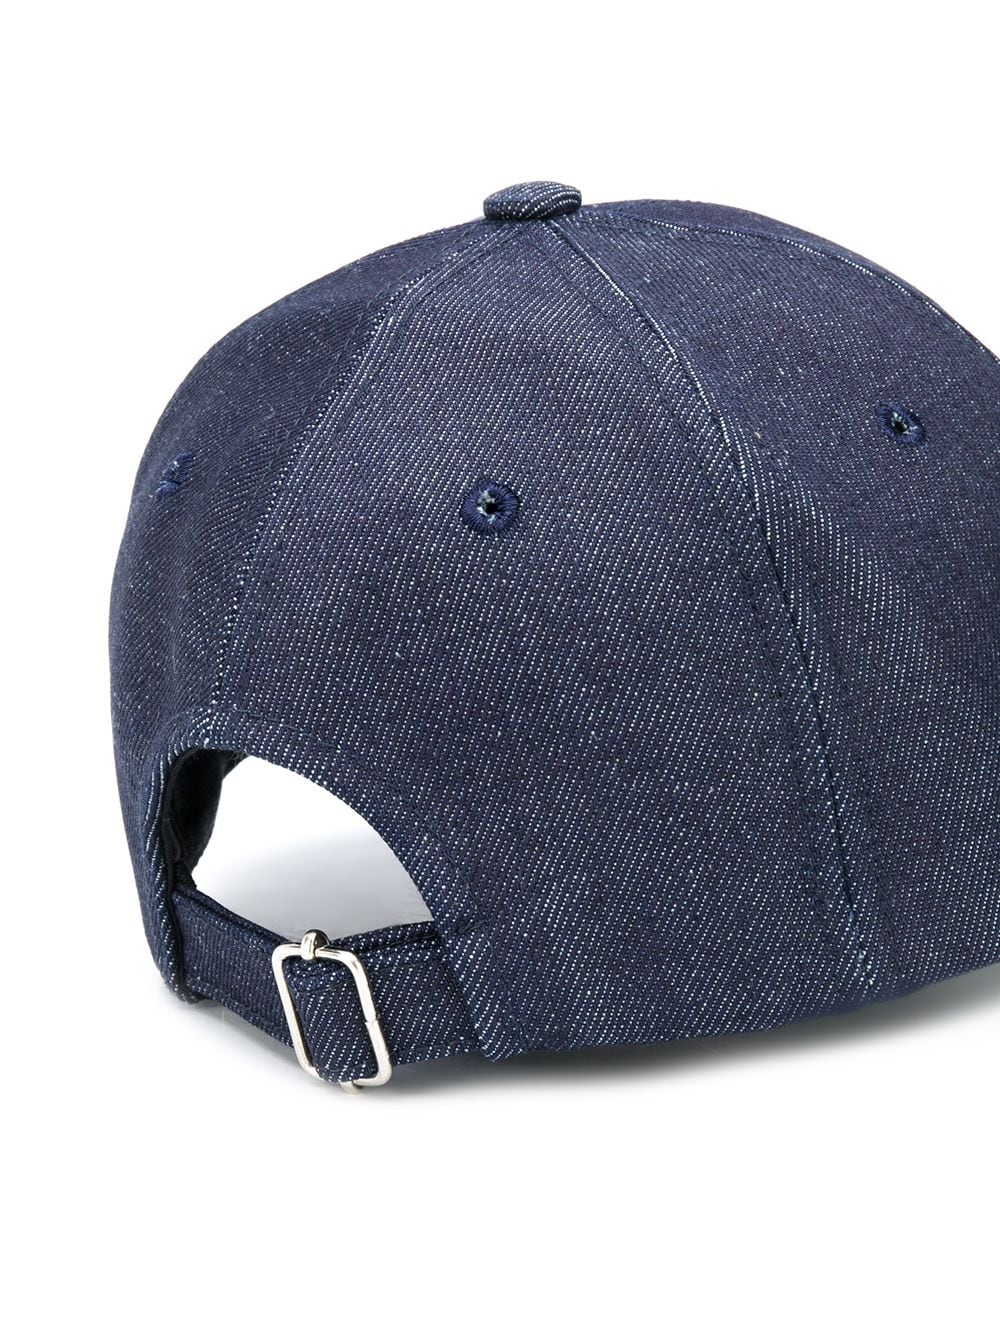 Denim Baseball Cap With Embroidered A.PC Logo